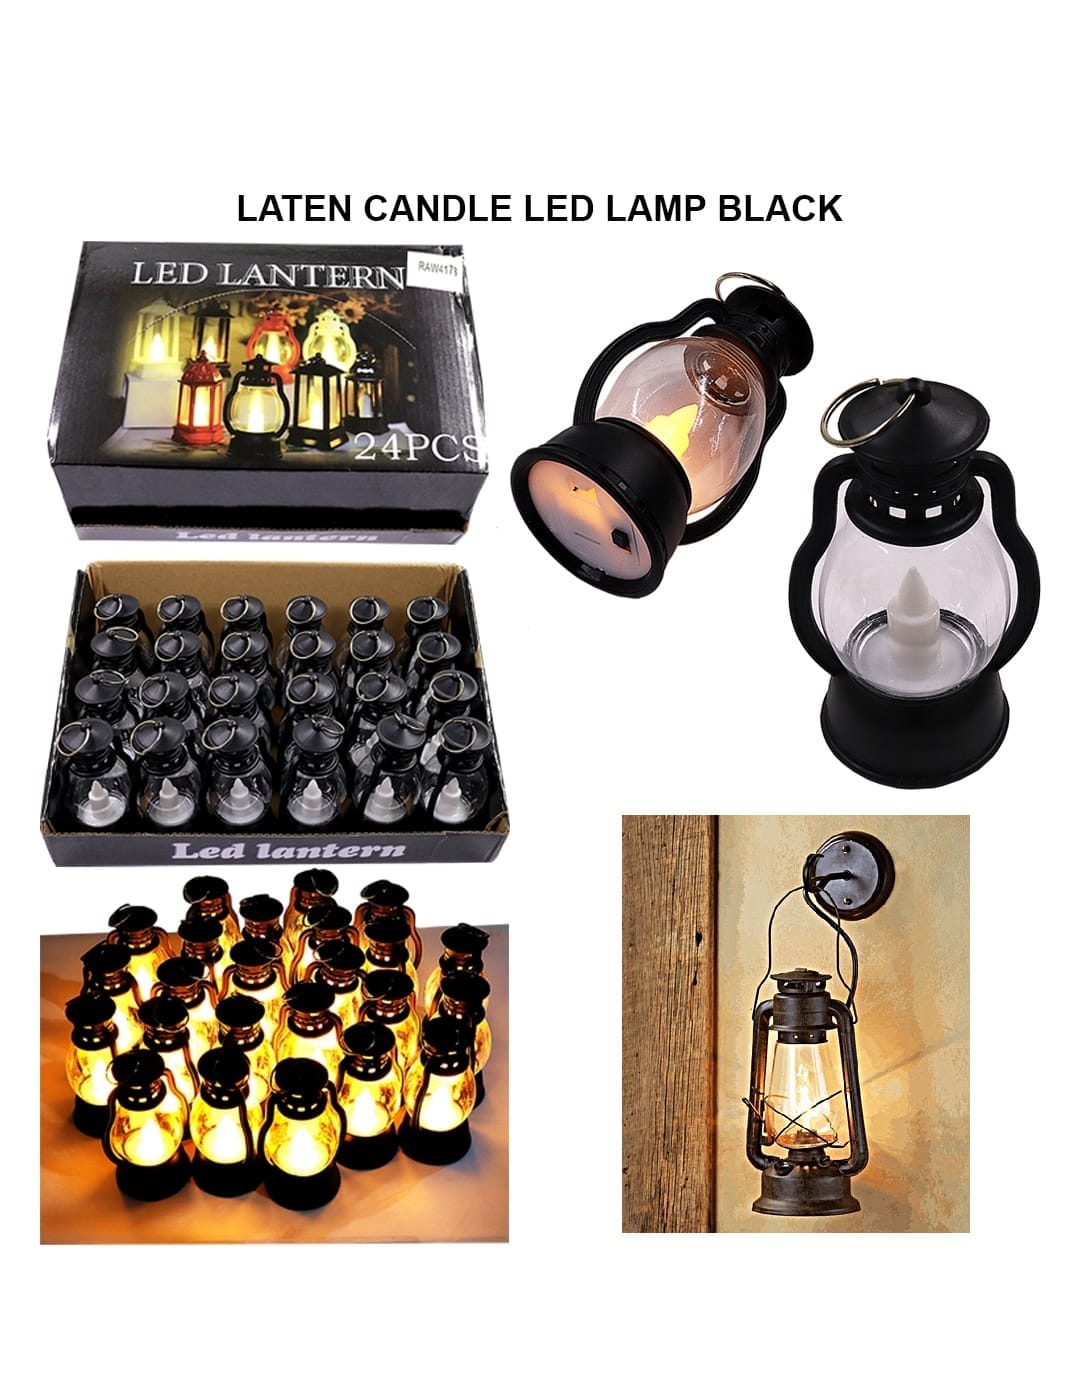 Ravrai Craft - Mumbai Branch Lights Festive Glow: LED Lantern Lights for Every Celebration I Pack of 1 Candel With  Free batteries Included I